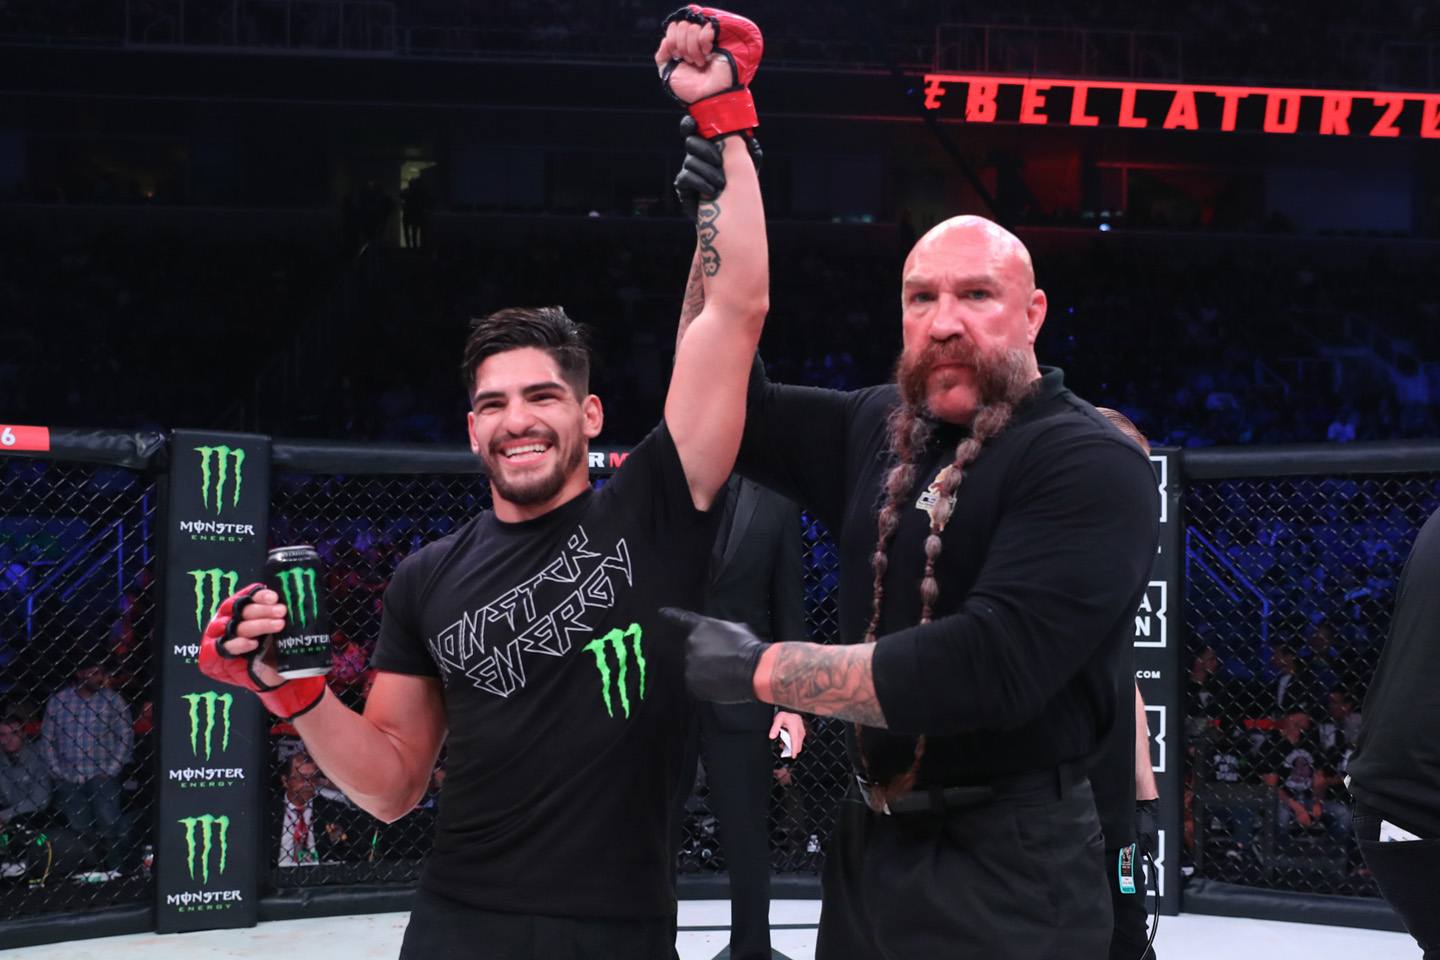 Monster Energy's Gaston Bolanos knocks out Ysidro Gutierrez in the featherweight bout at Bellator 206